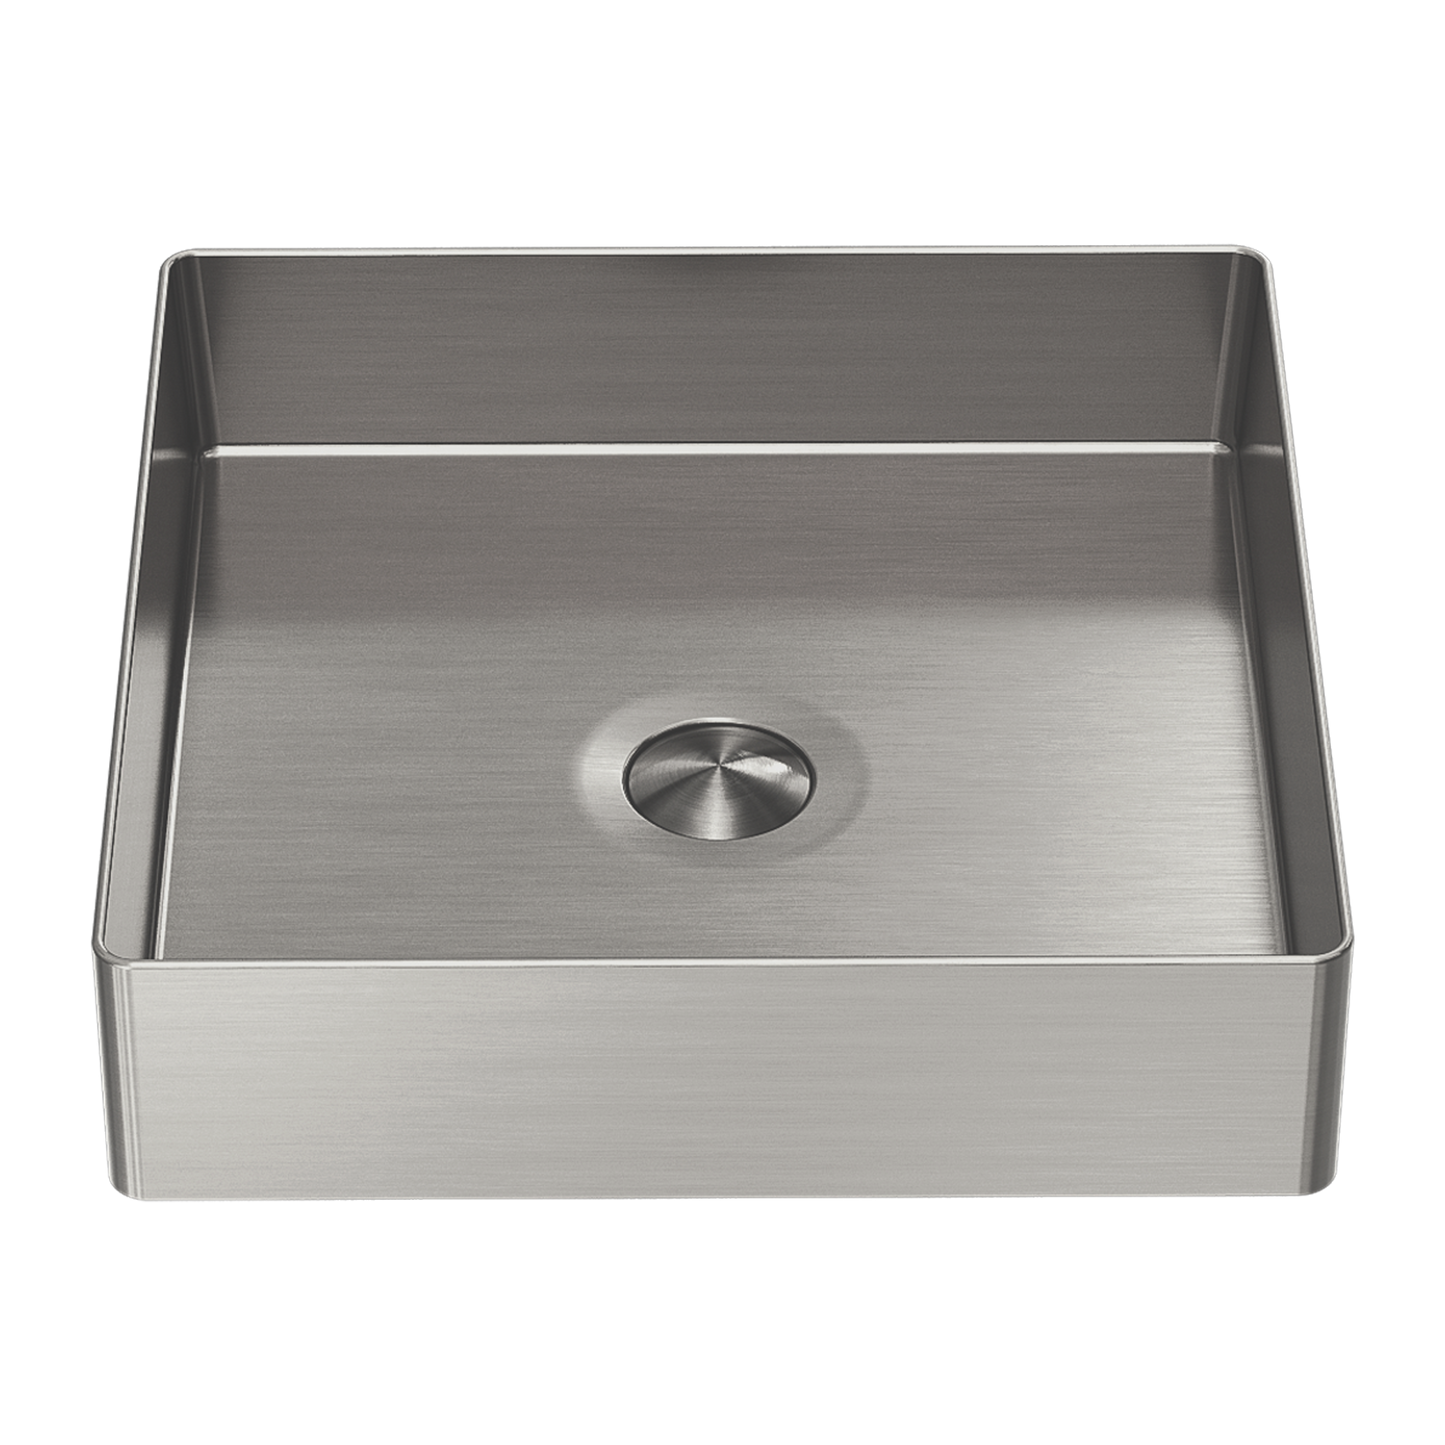 Stainless Steel Square Counter Top Basin - Brushed Nickel with PVD Coating